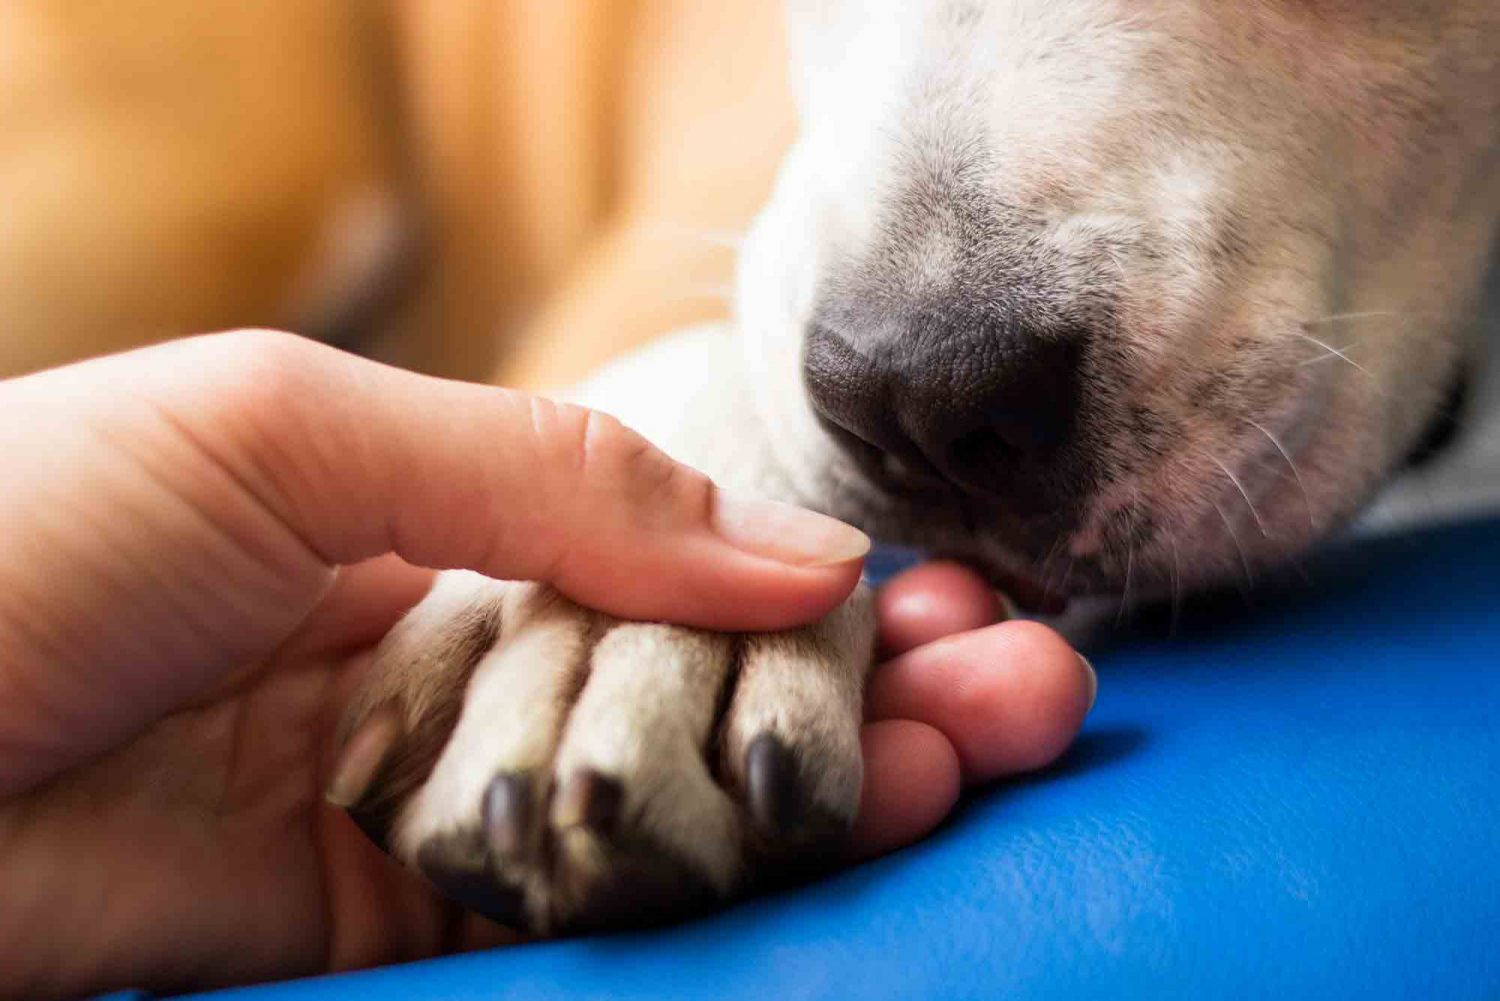 End of life care for pets is an important part of pet ownership